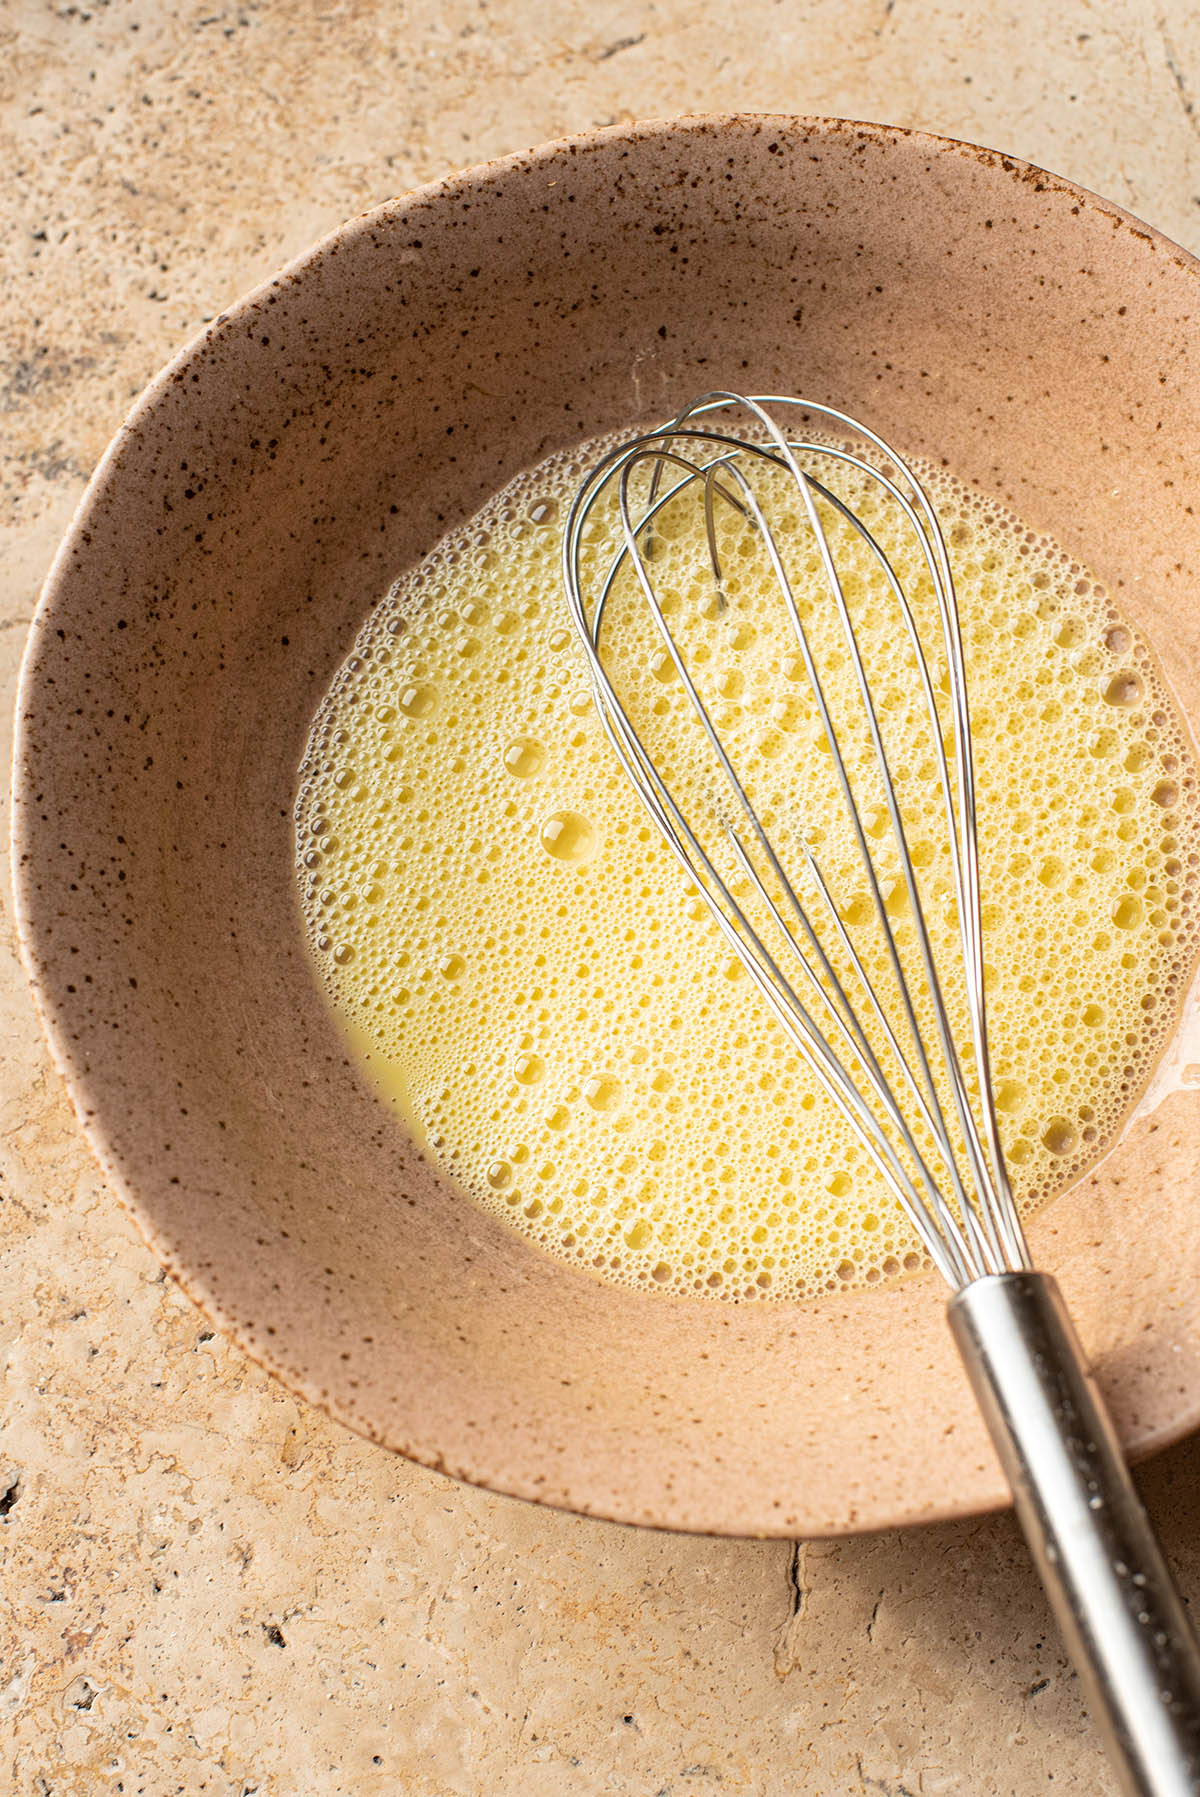 Whisked eggs and wet ingredients in a bowl with whisk.